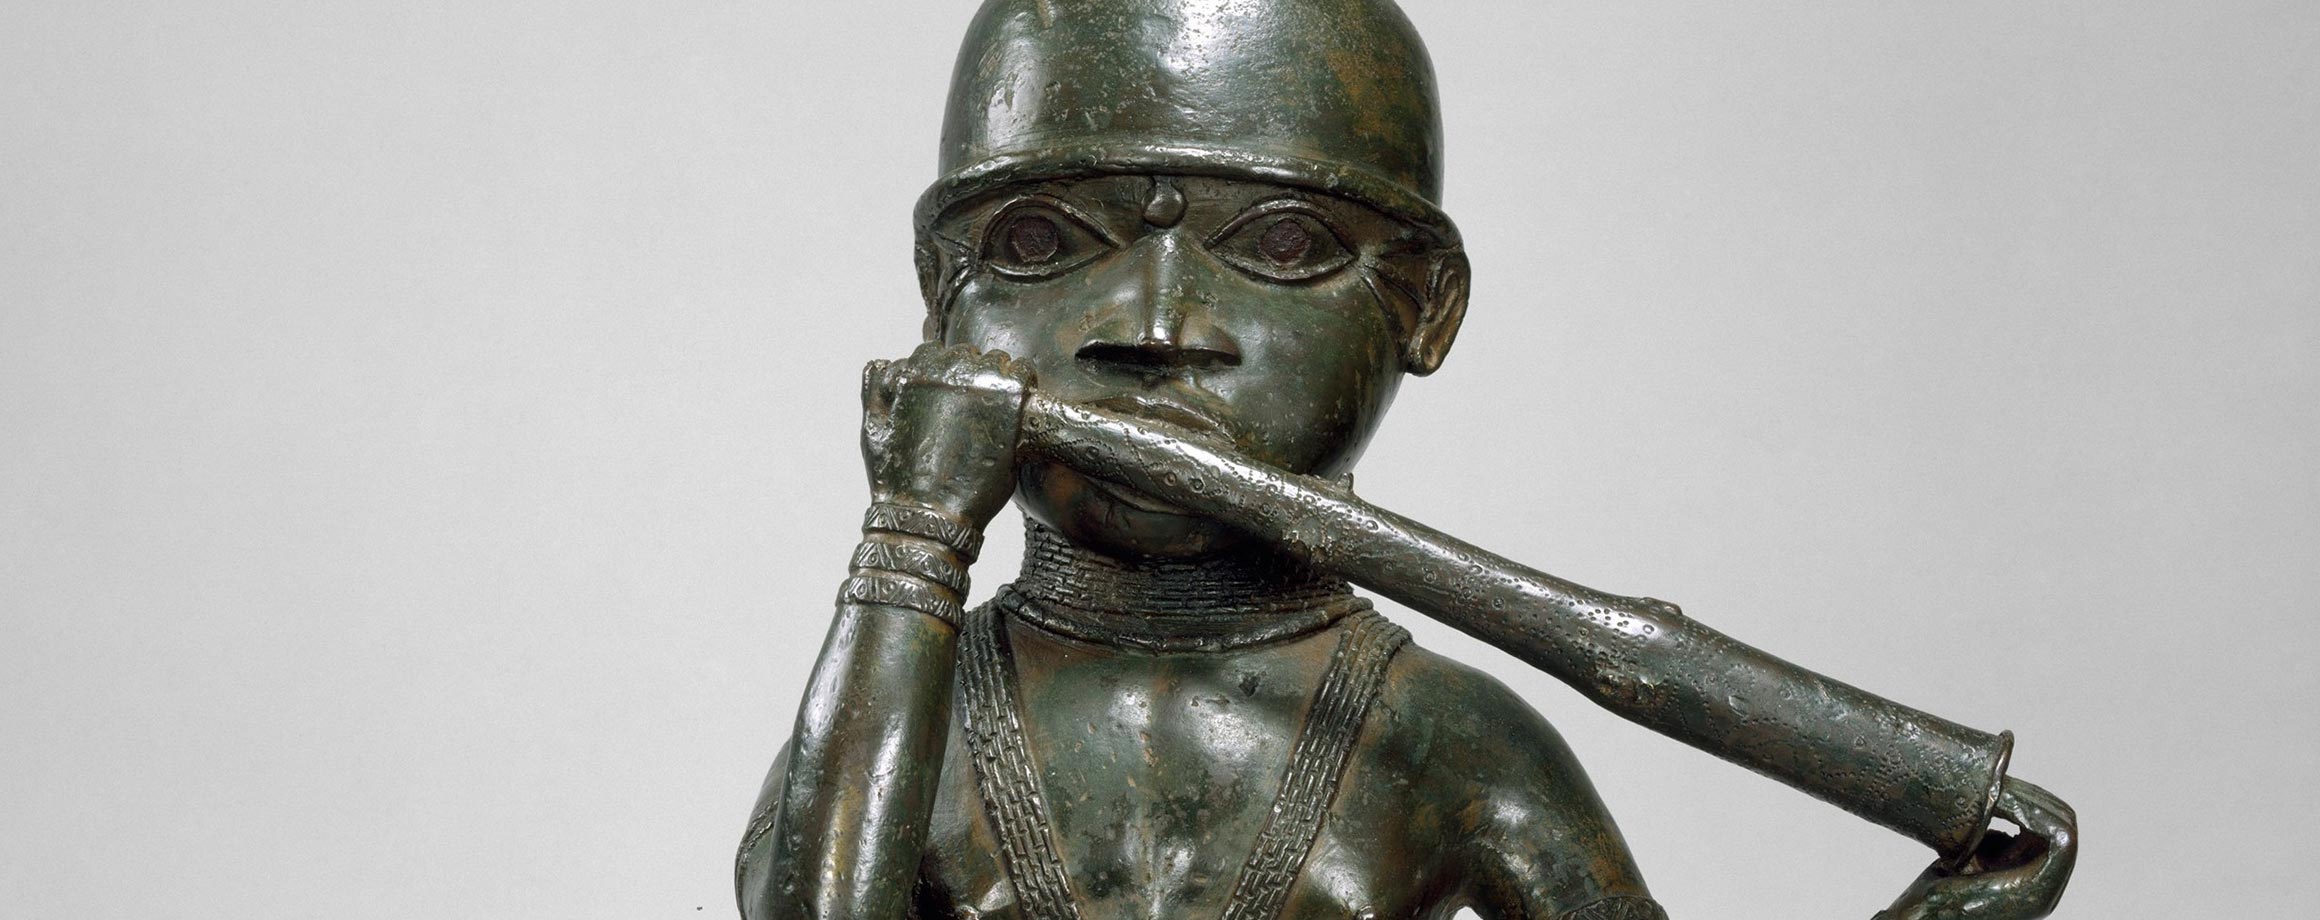 Detail of a Nigerian sculpture, made of dark brass with a green patina and standing two feet tall, of a man playing a horn